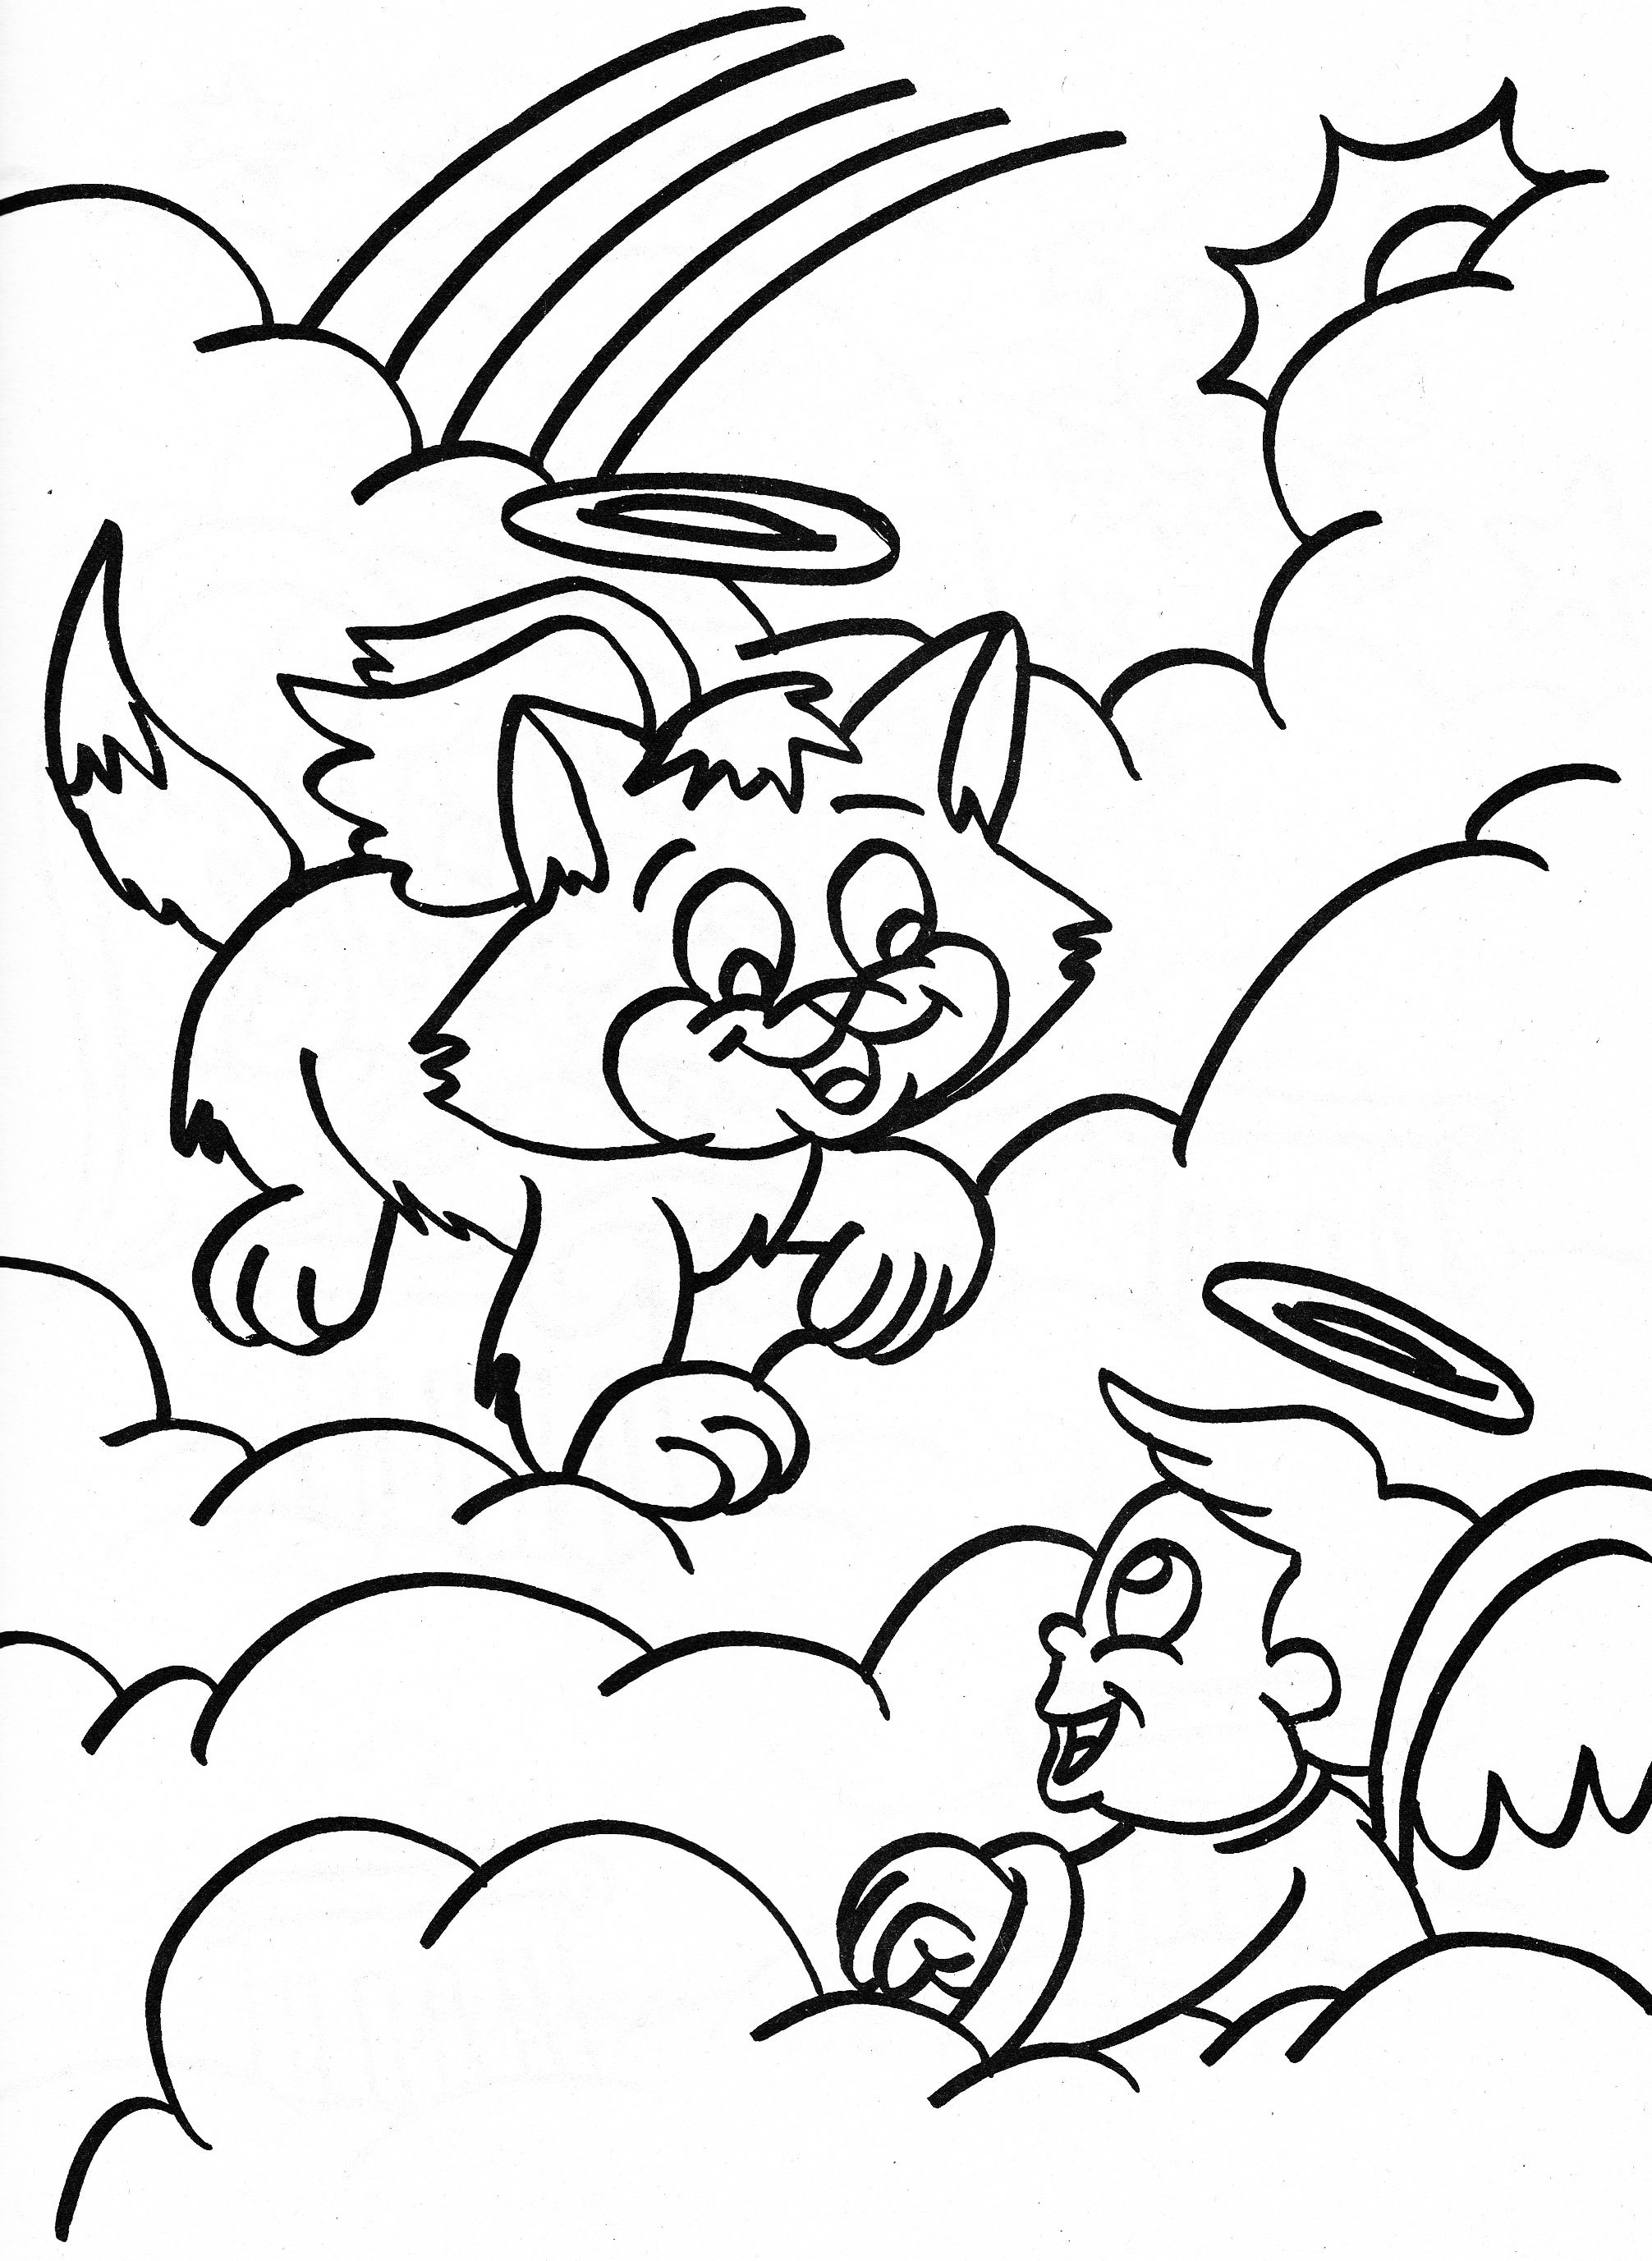 Boy Angel Coloring Pages at GetColorings.com | Free printable colorings ...